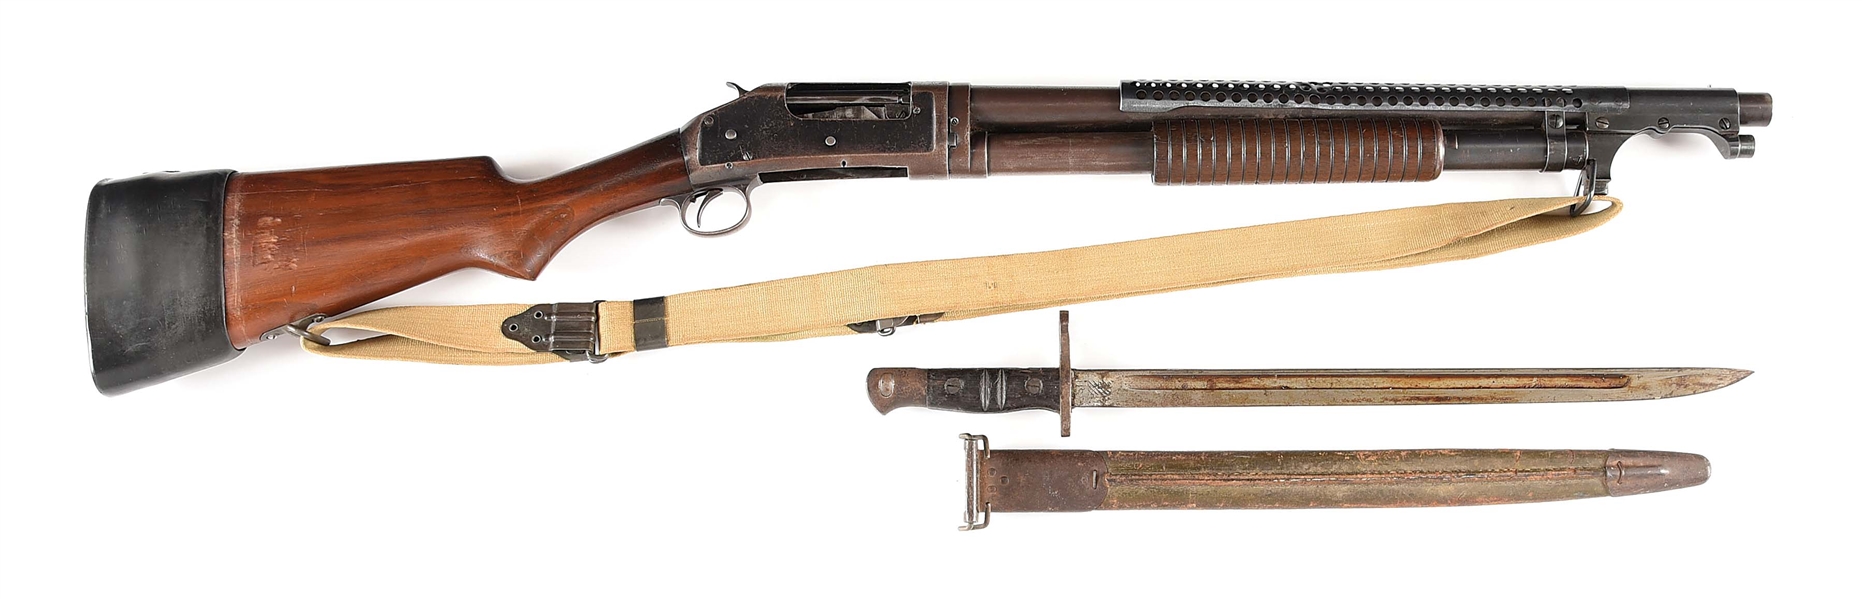 (C) UNITED STATES PROPERTY MARKED WINCHESTER MODEL 97 TRENCH PUMP-ACTION SHOTGUN WITH BAYONET.